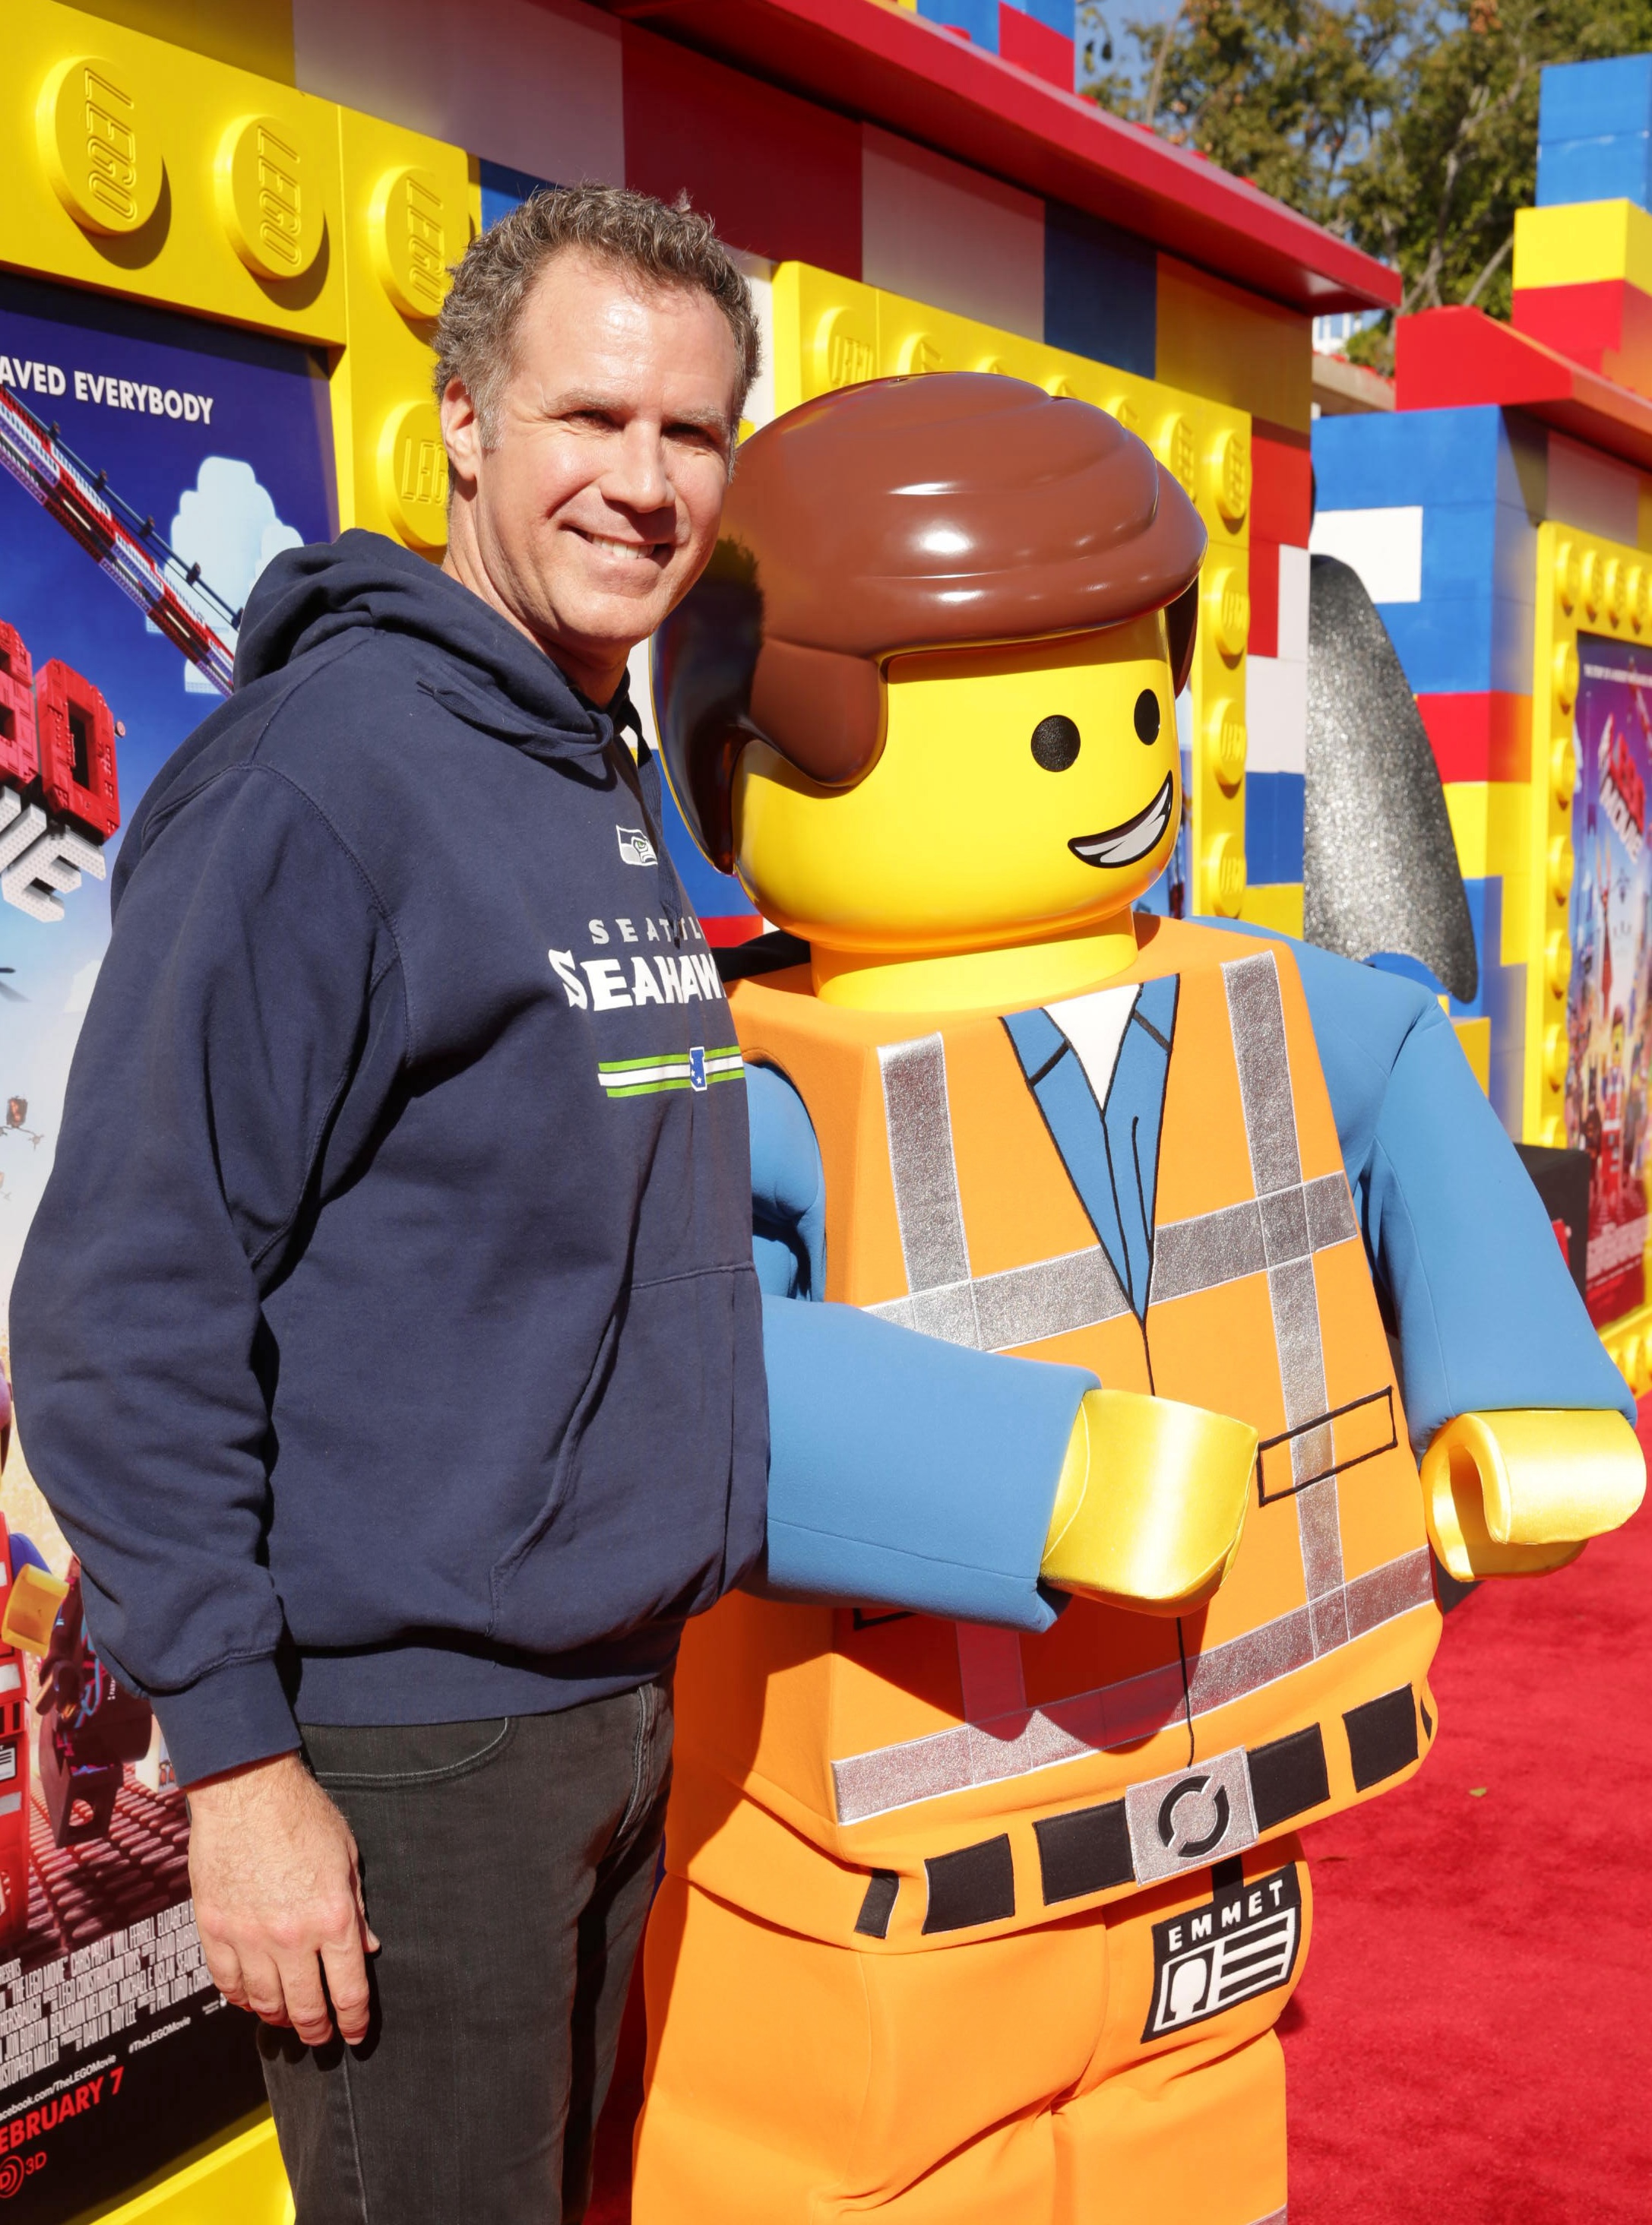 <p>Who knew a Lego movie could be so good? Will Ferrell voiced President Business in 2014's "The Lego Movie" and had us enjoying every second. The film was so good that it earned a Golden Globe nomination for best animated film and an Academy Award nomination for best original song for "Everything Is Awesome." "The Lego Movie" also dominated at the box office, earning $470 million on a $60 million budget!</p>